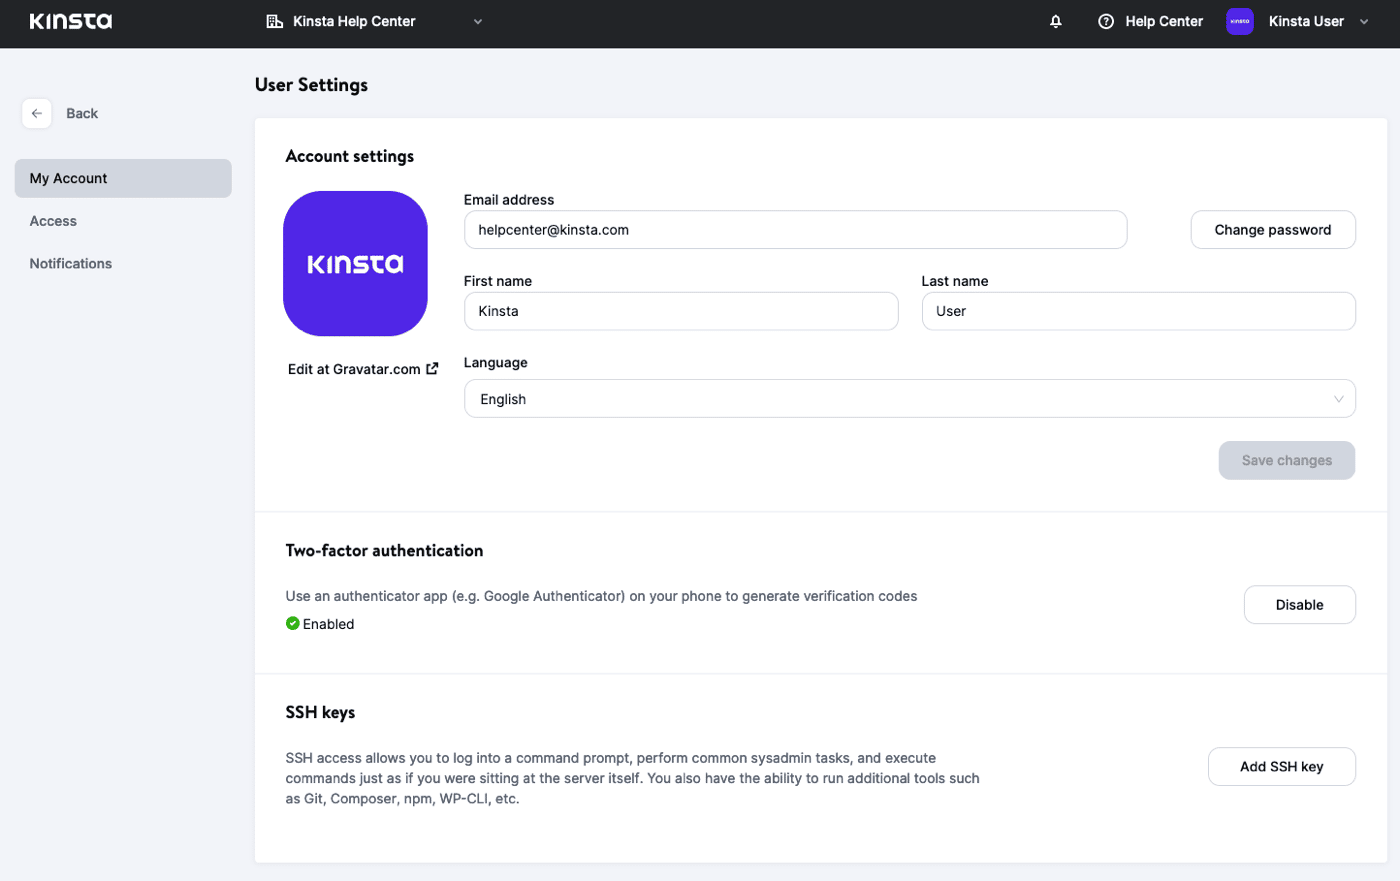 Enable two-factor authentication in MyKinsta.